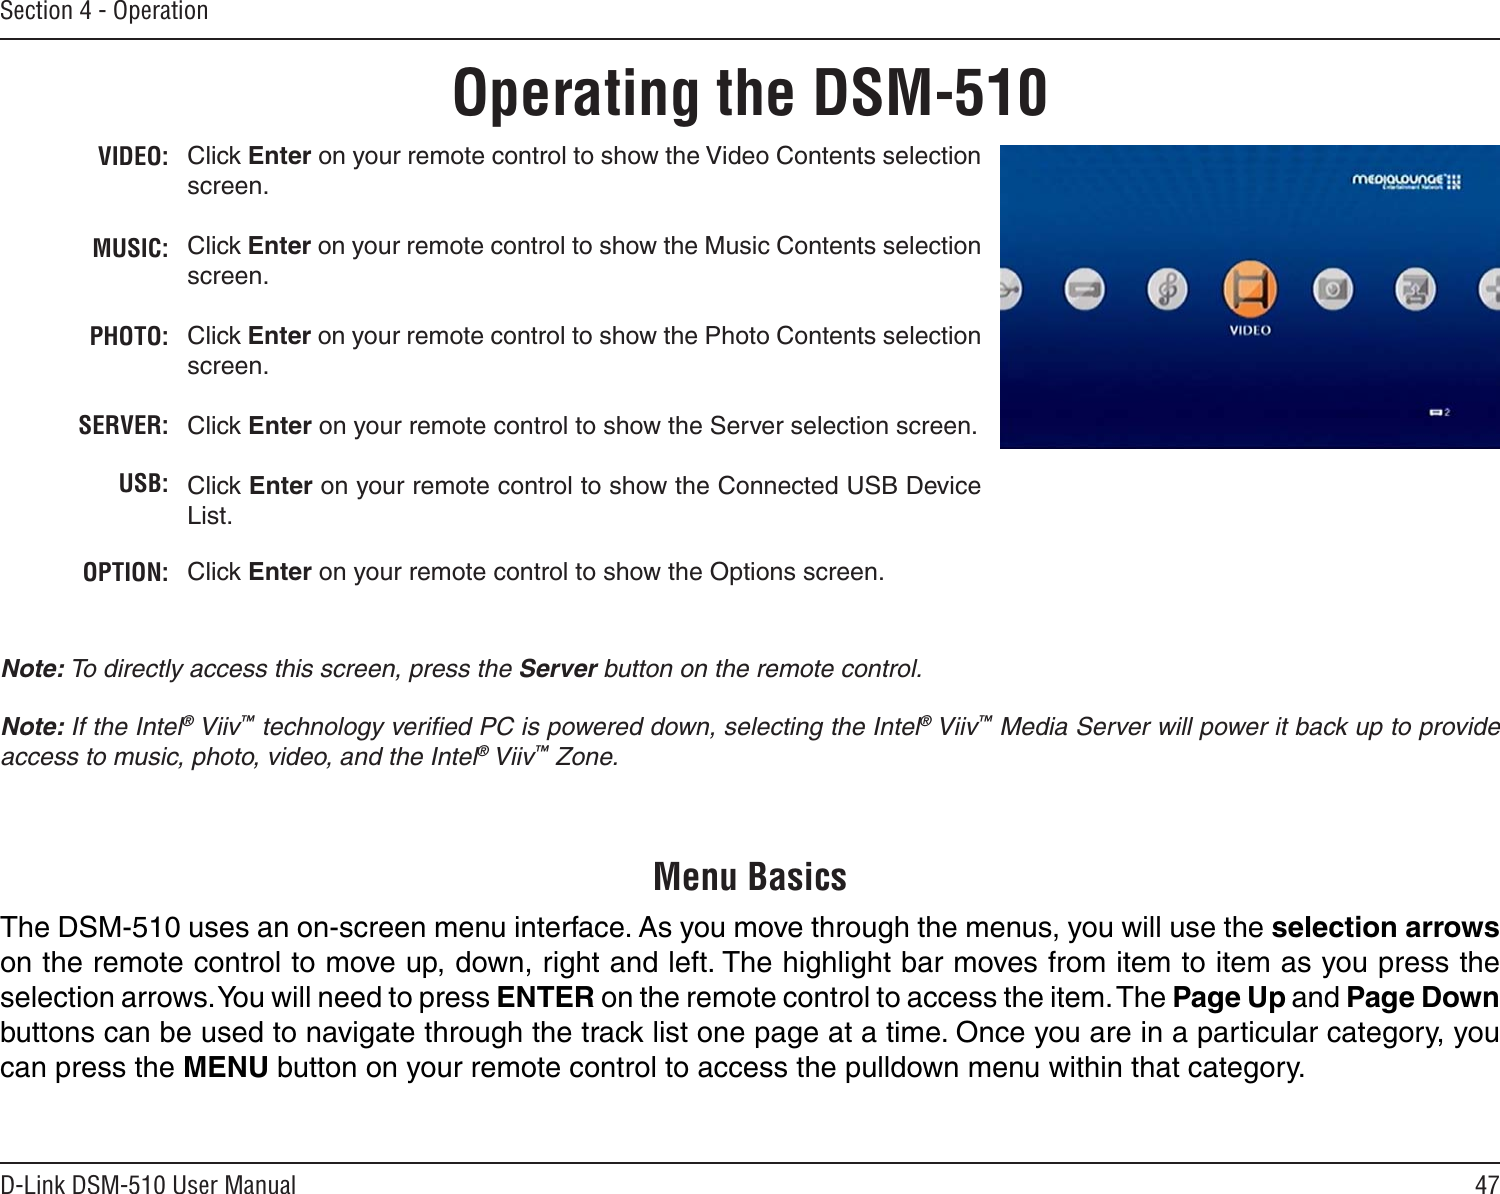 47D-Link DSM-510 User ManualSection 4 - OperationVIDEO:MUSIC:PHOTO:SERVER:USB:OPTION:Click Enter on your remote control to show the Video Contents selection screen.Click Enter on your remote control to show the Music Contents selection screen.Click Enter on your remote control to show the Photo Contents selection screen.Click Enter on your remote control to show the Server selection screen.Click Enter on your remote control to show the Connected USB Device List.Click Enter on your remote control to show the Options screen.Operating the DSM-510Note: To directly access this screen, press the Server button on the remote control.Note: If the Intel® Viiv™ technology veriﬁed PC is powered down, selecting the Intel® Viiv™ Media Server will power it back up to provide access to music, photo, video, and the Intel® Viiv™ Zone.The DSM-510 uses an on-screen menu interface. As you move through the menus, you will use the selection arrows on the remote control to move up, down, right and left. The highlight bar moves from item to item as you press the selection arrows. You will need to press ENTER on the remote control to access the item. The Page Up and Page Down buttons can be used to navigate through the track list one page at a time. Once you are in a particular category, you can press the MENU button on your remote control to access the pulldown menu within that category.Menu Basics